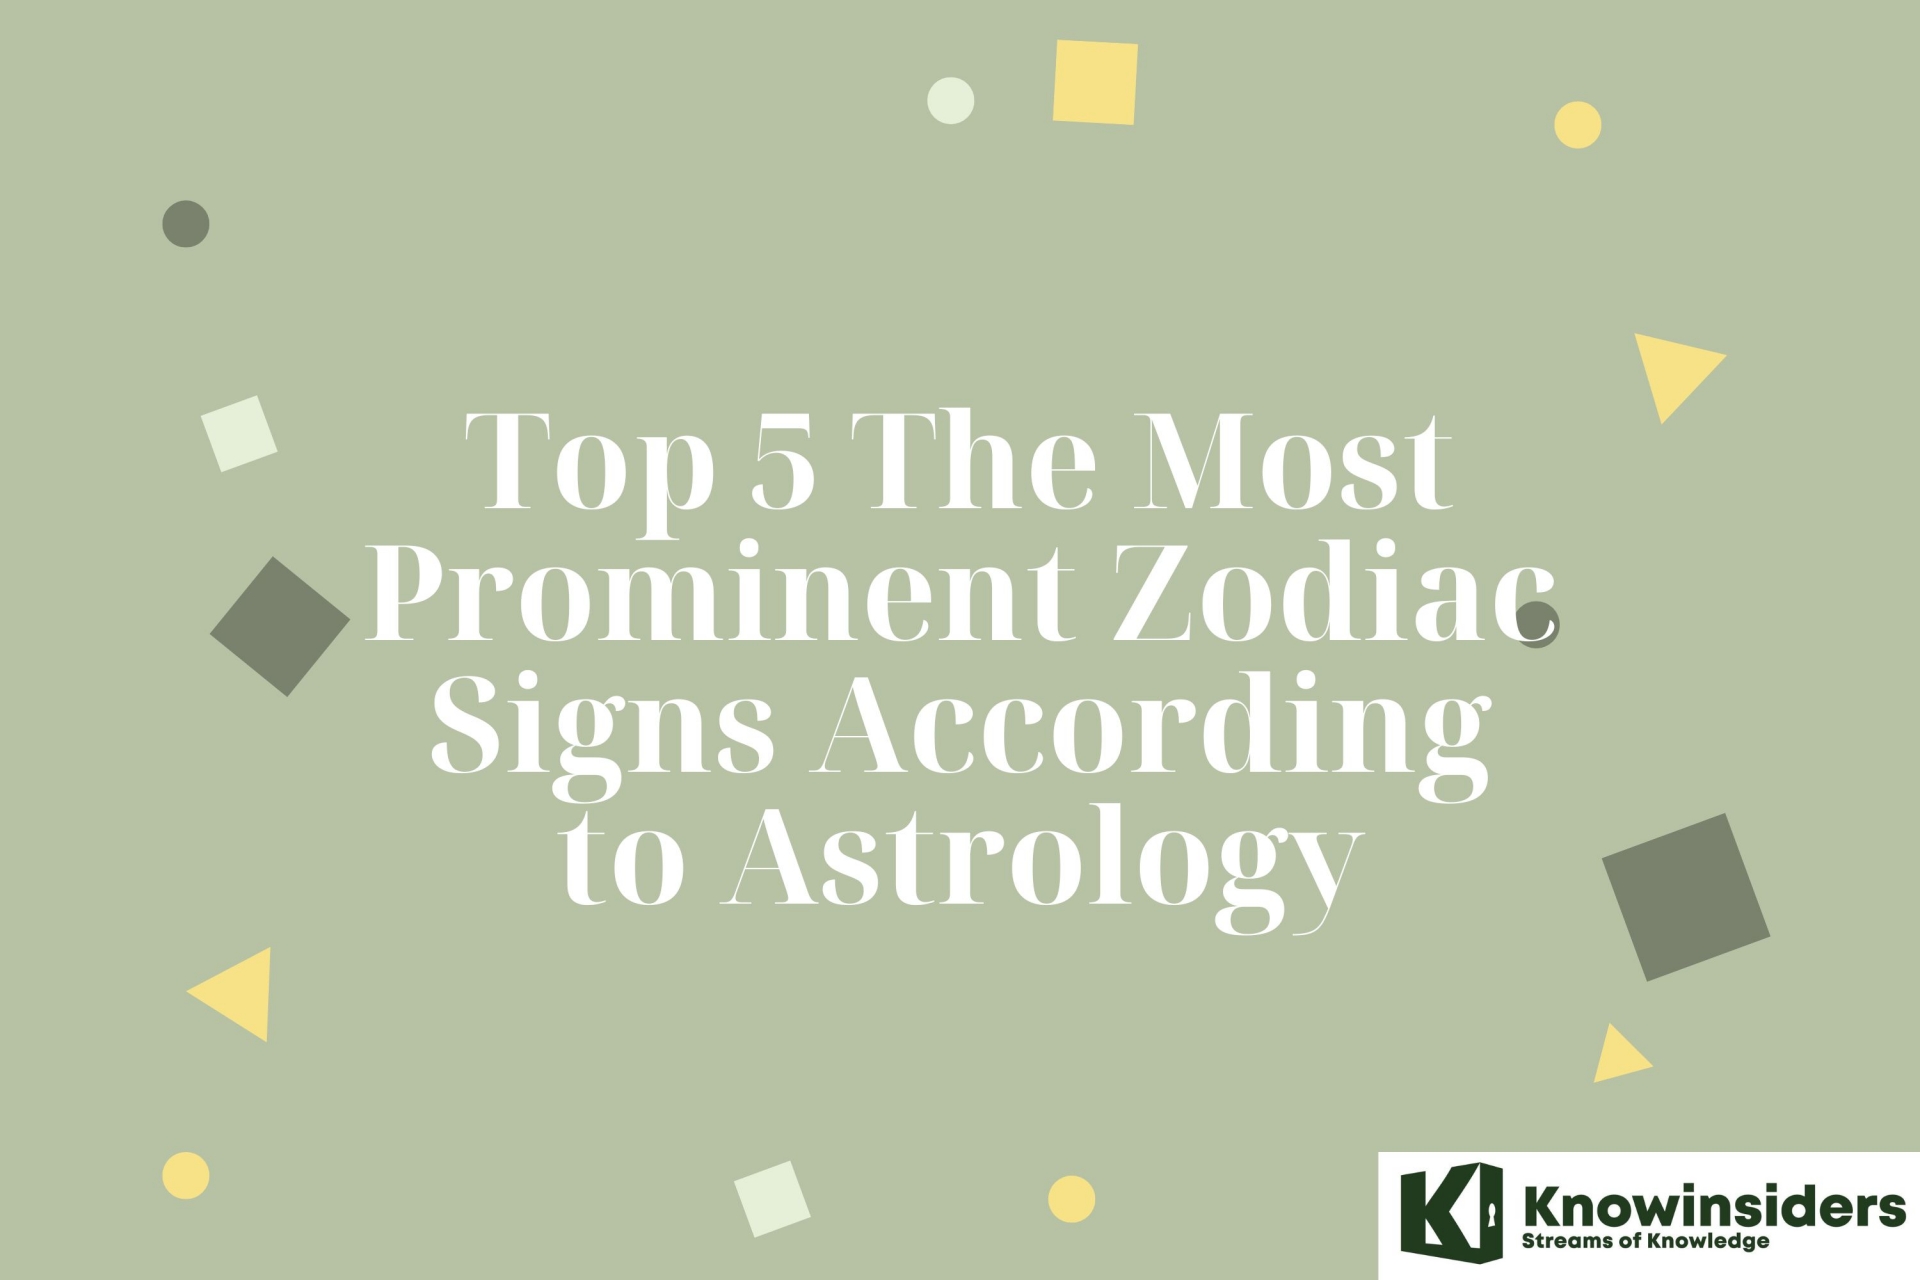 Top 5 Most Prominent Zodiac Signs - According to Astrology